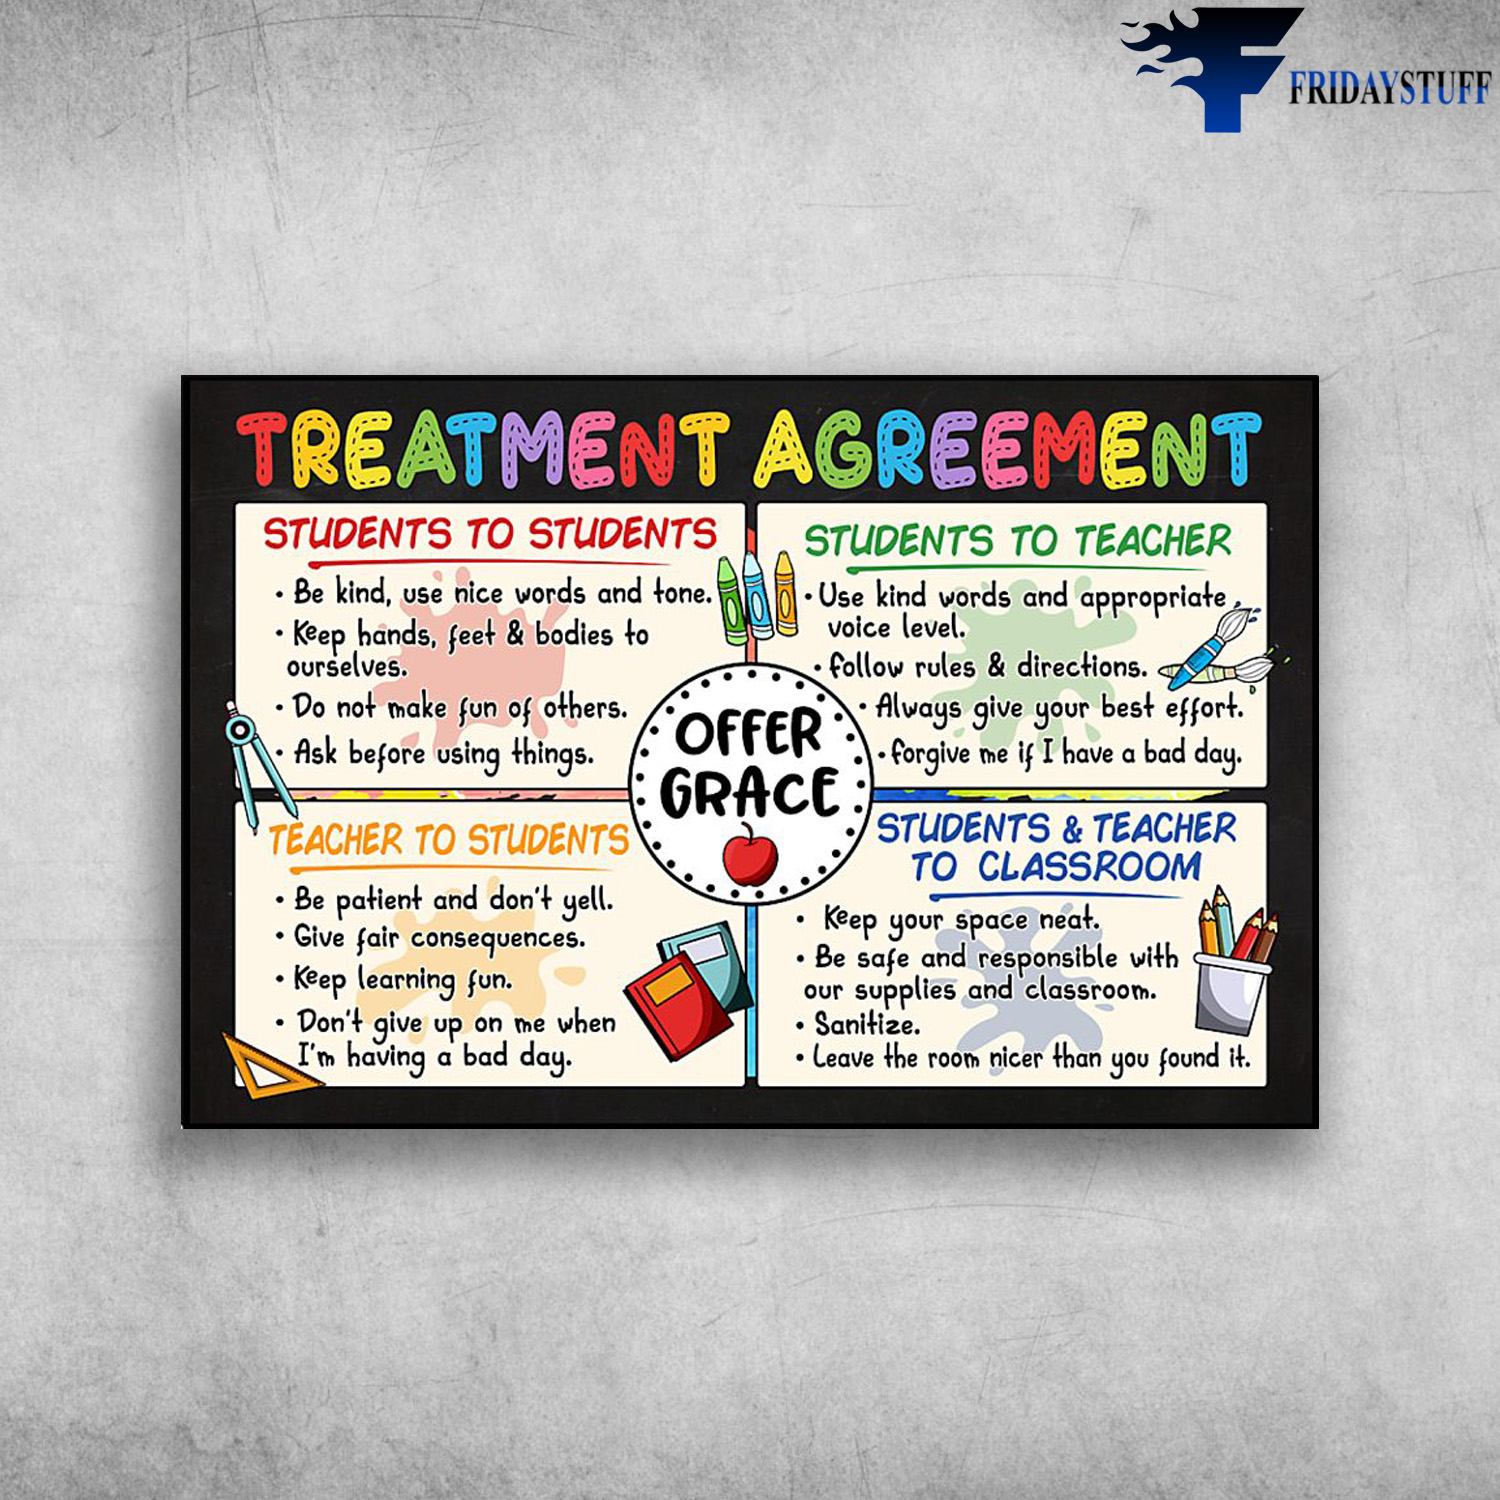 Treatment Agreement Classroom - Students To Students, Be Kind, Use Nice Words And Tone, Keep Hands, Feer And Bodies To Ourselve, Do Not Make Fun Others, Ask Be Fore Using Things, Students To Teacher, Teacher To Students